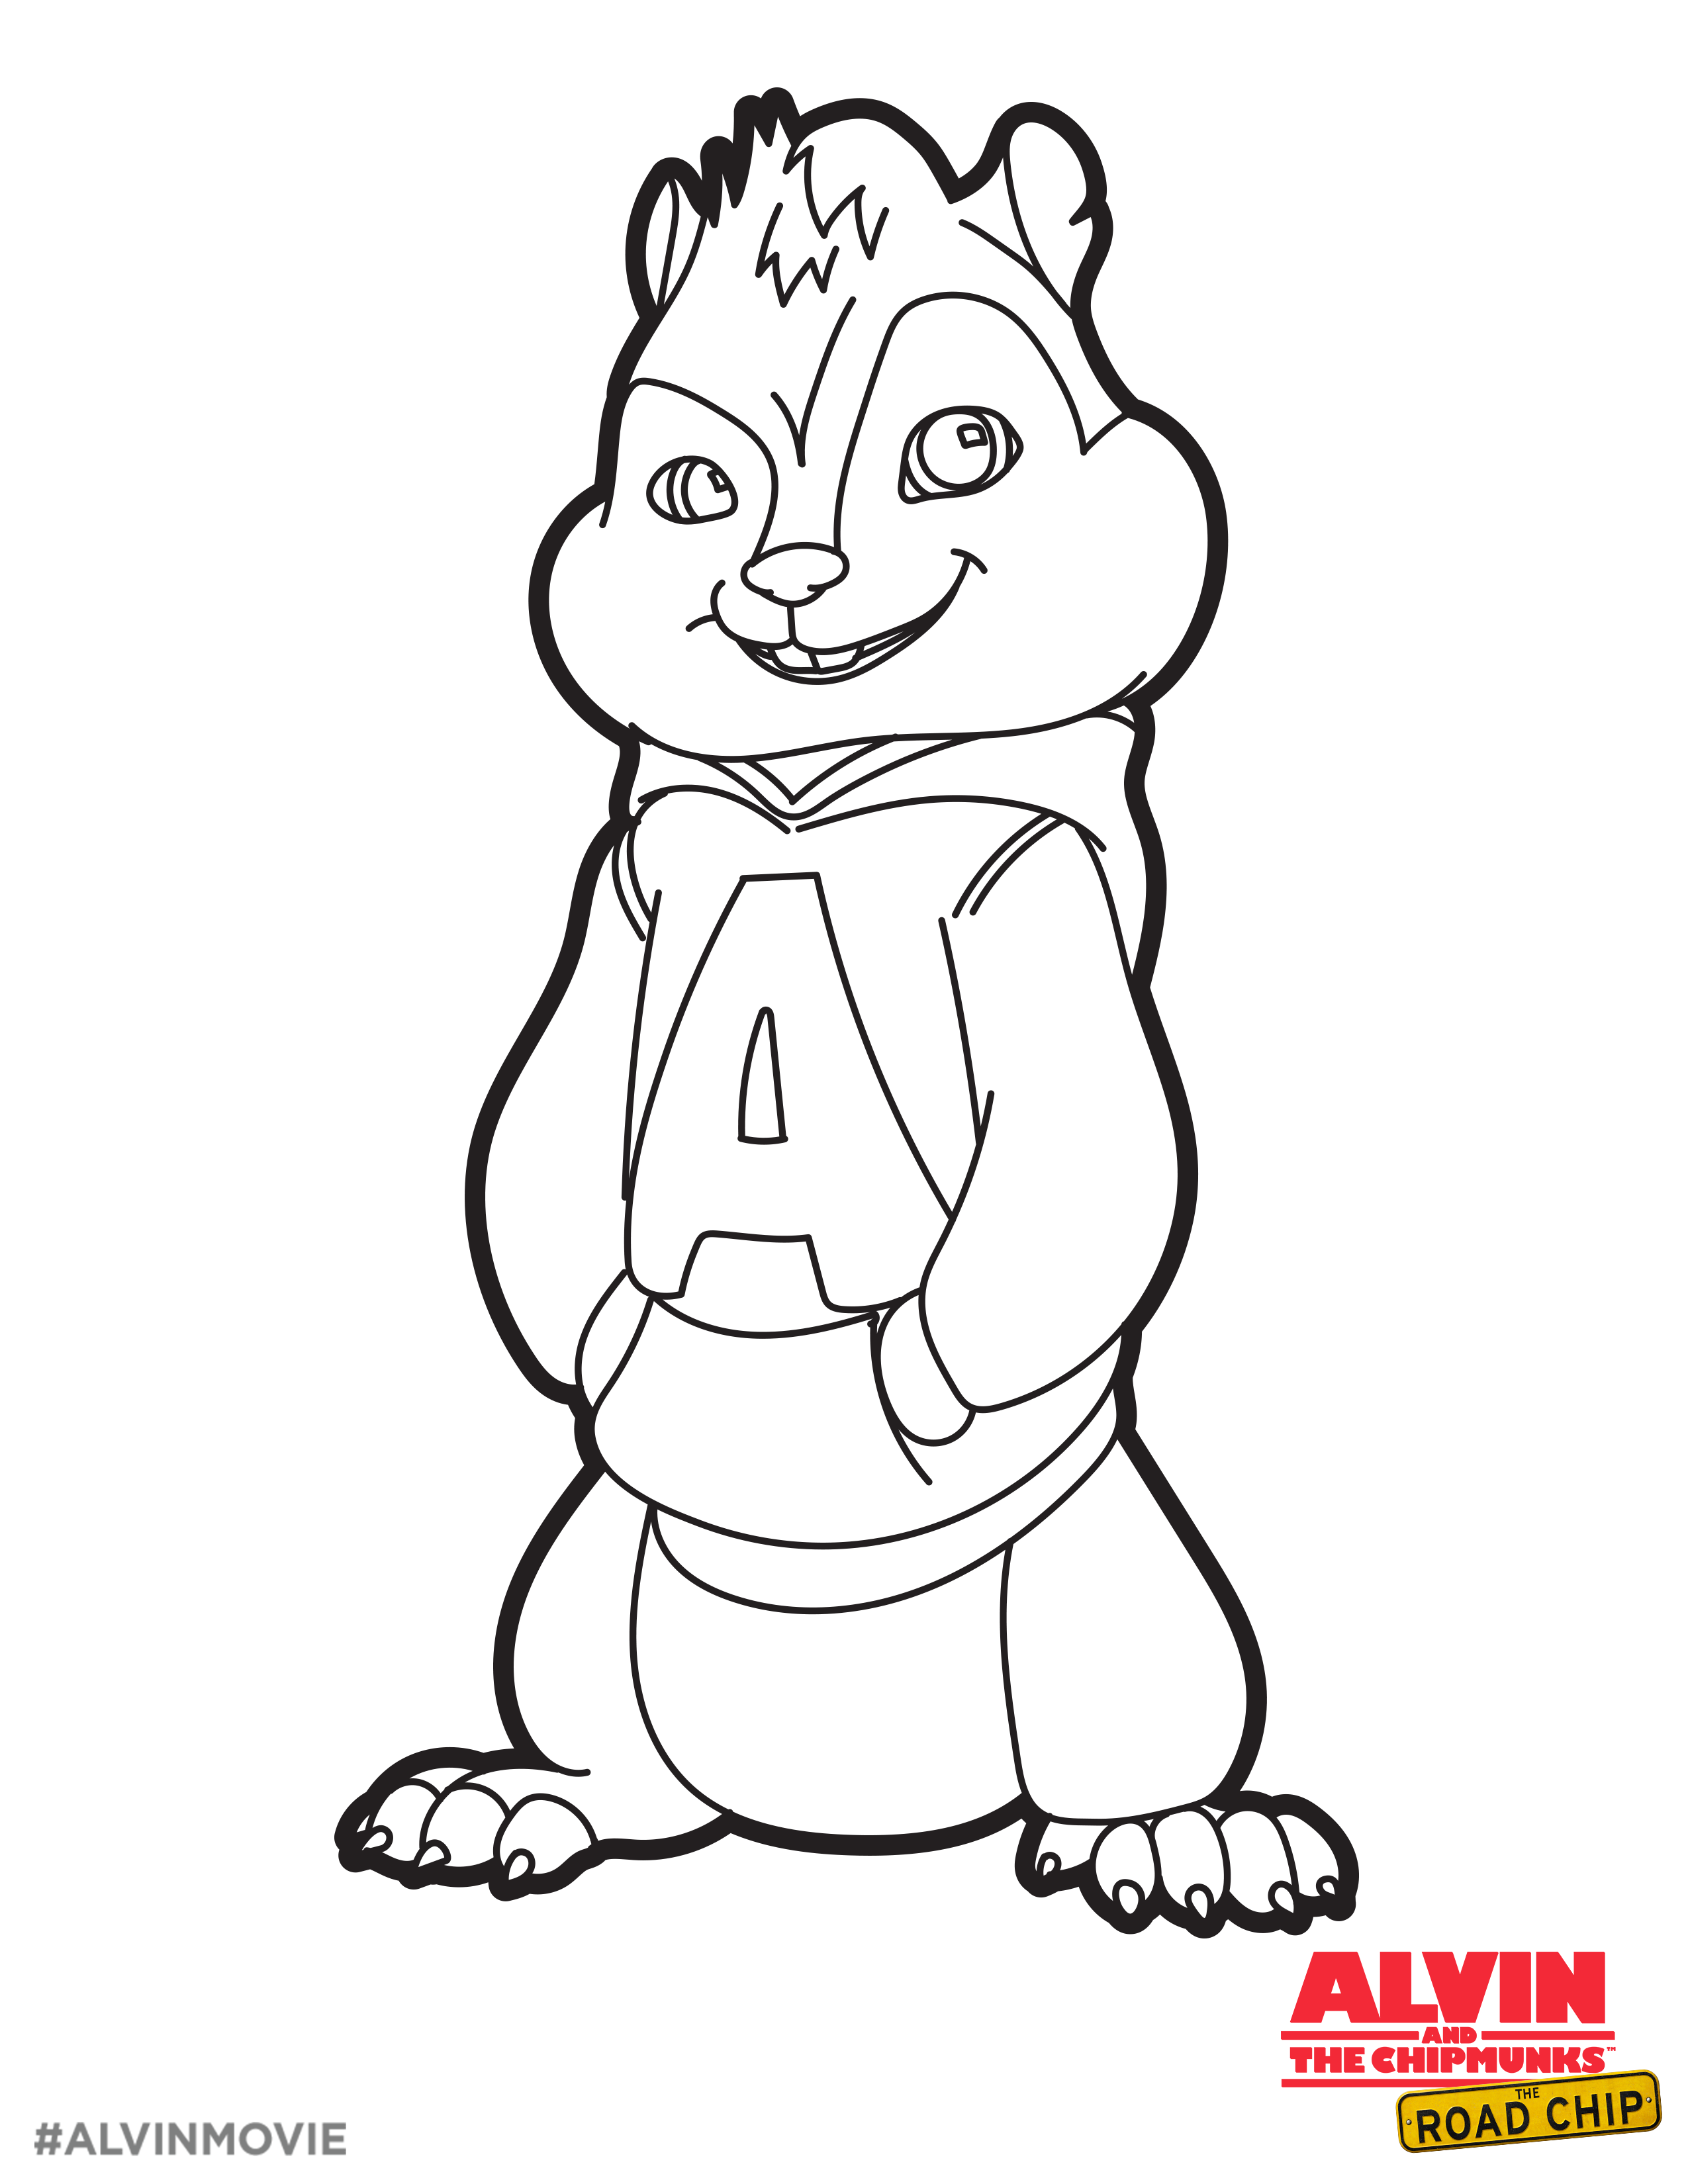 Free Alvin Coloring Printable Perfect For A Road Trip Alvin And The Chipmunks The Road Cartoon Coloring Pages Disney Princess Colors Alvin And The Chipmunks